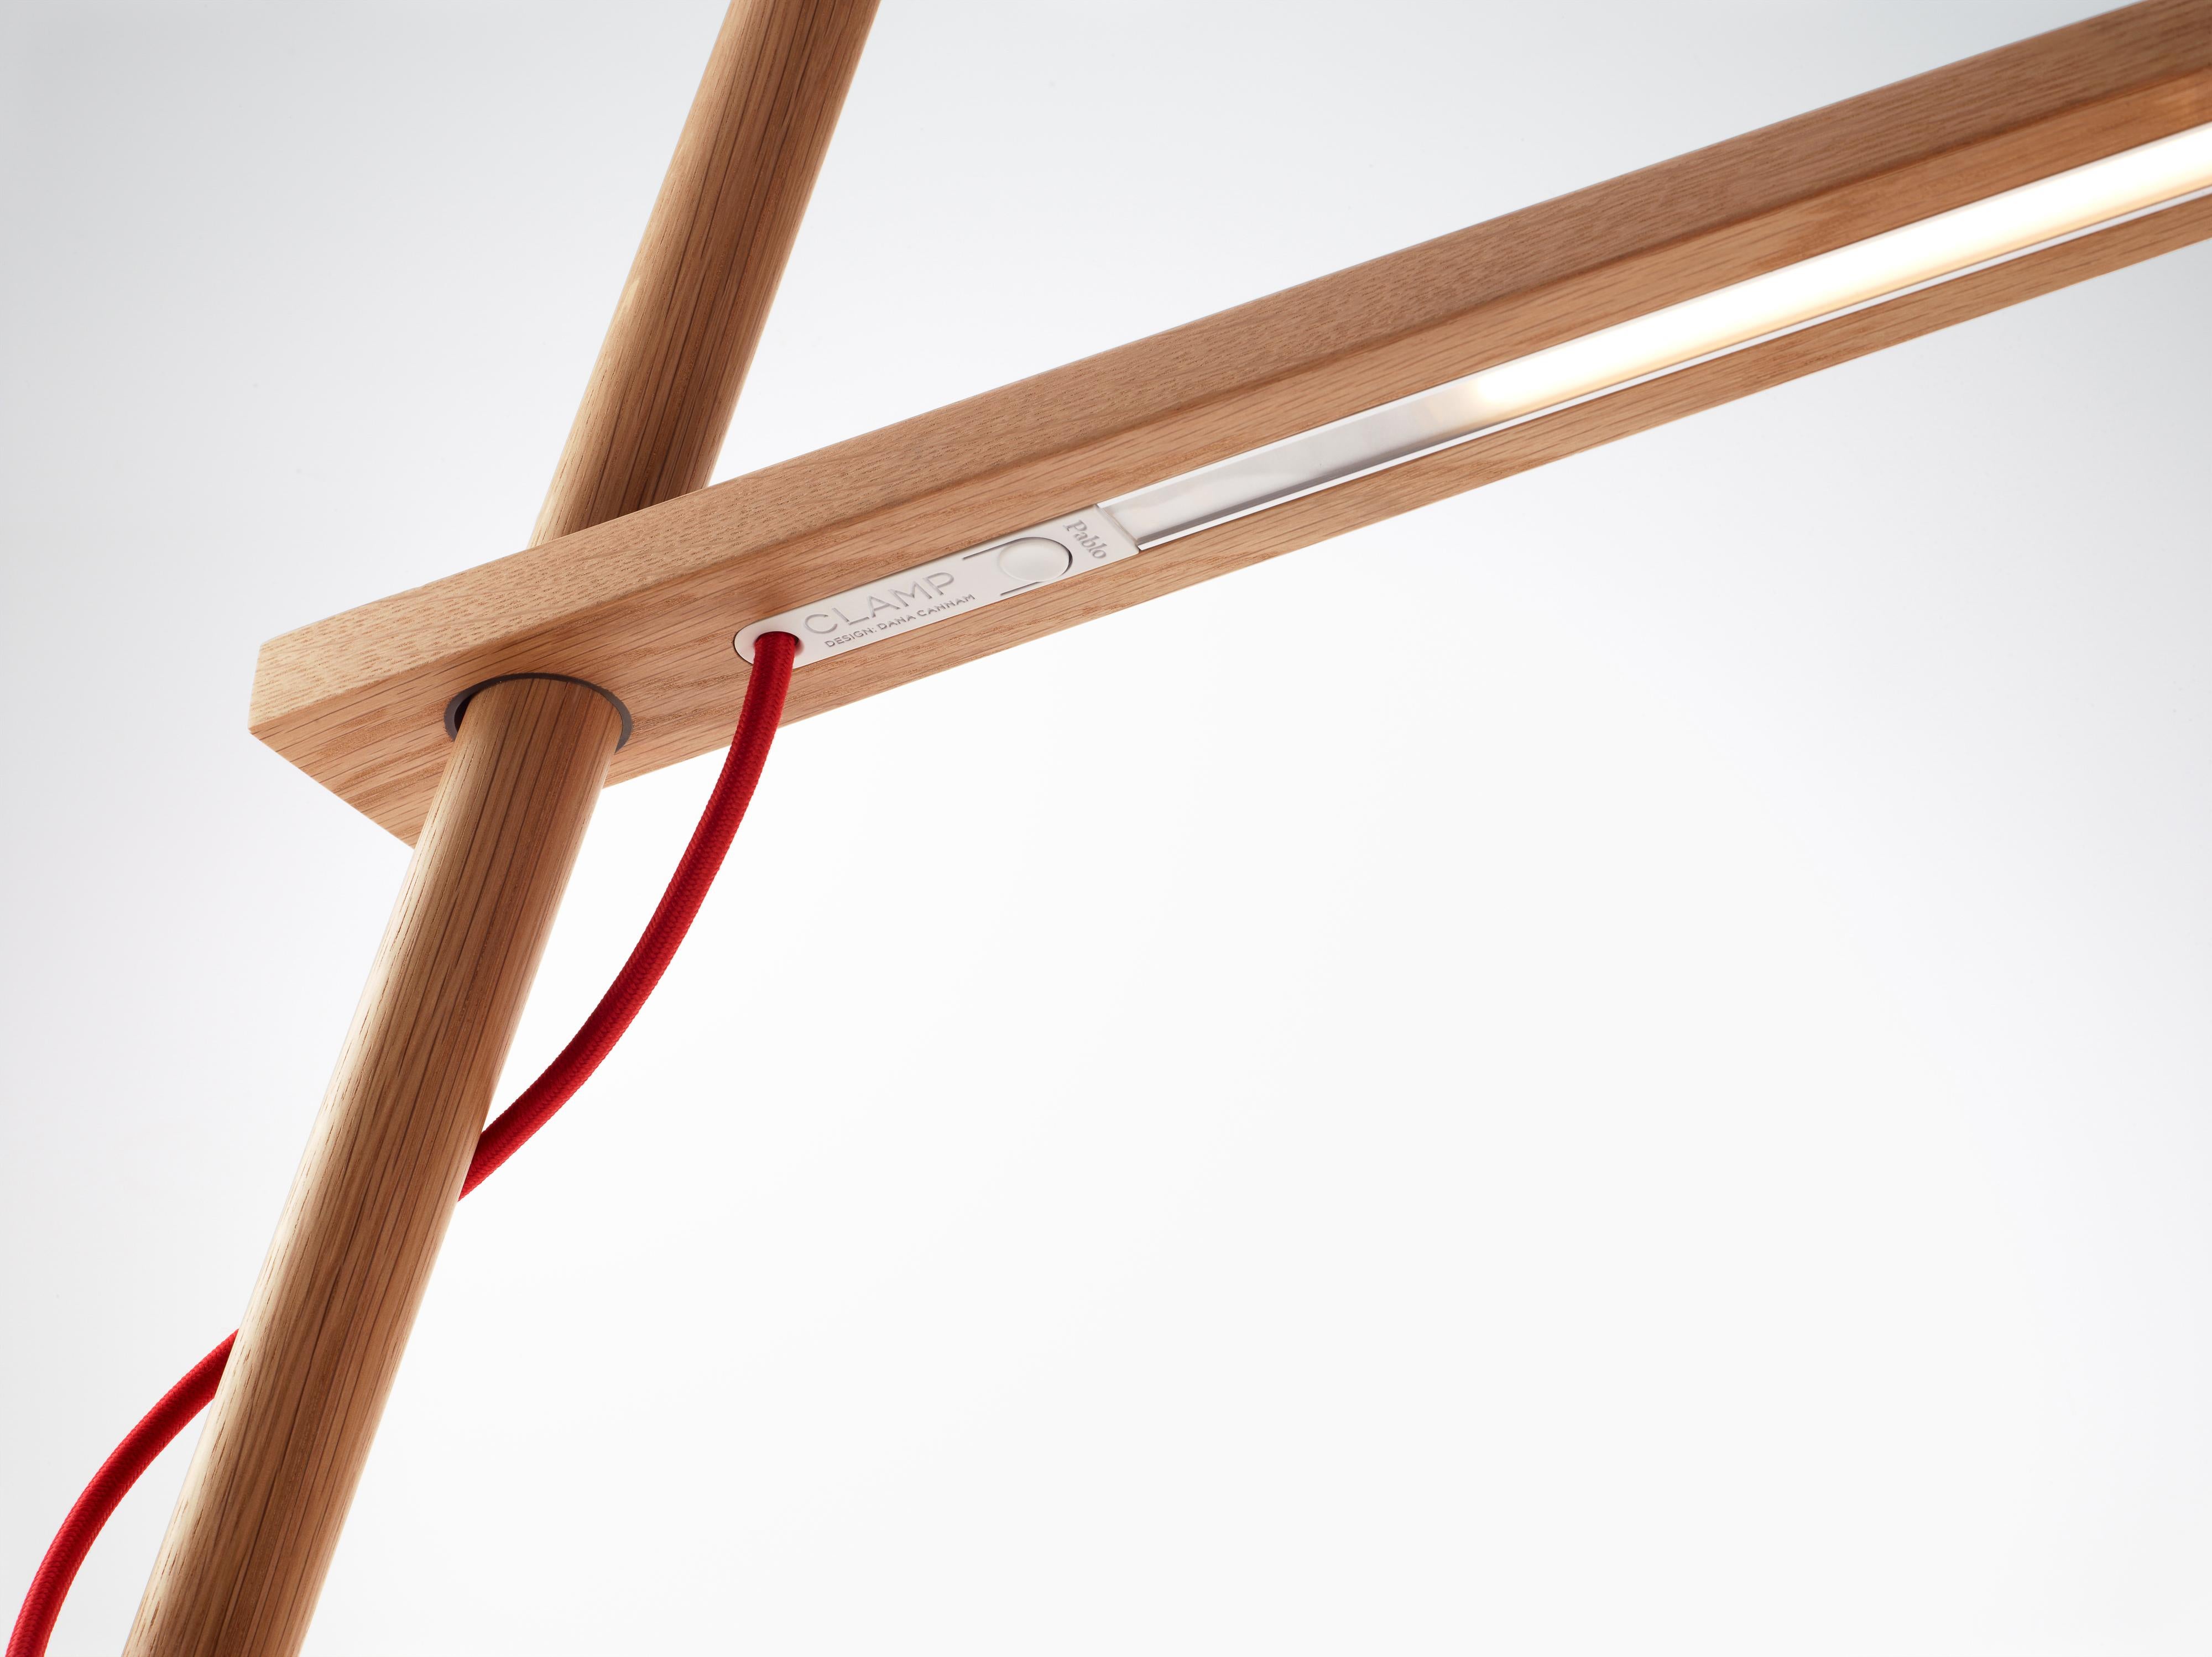 Designed for simplicity and engineered for sustainability, Clamp combines the beauty of wood with the brilliance of LED technology. Clamp is comprised of 3 main components that work together to provide infinite adjustment, while focusing warm,